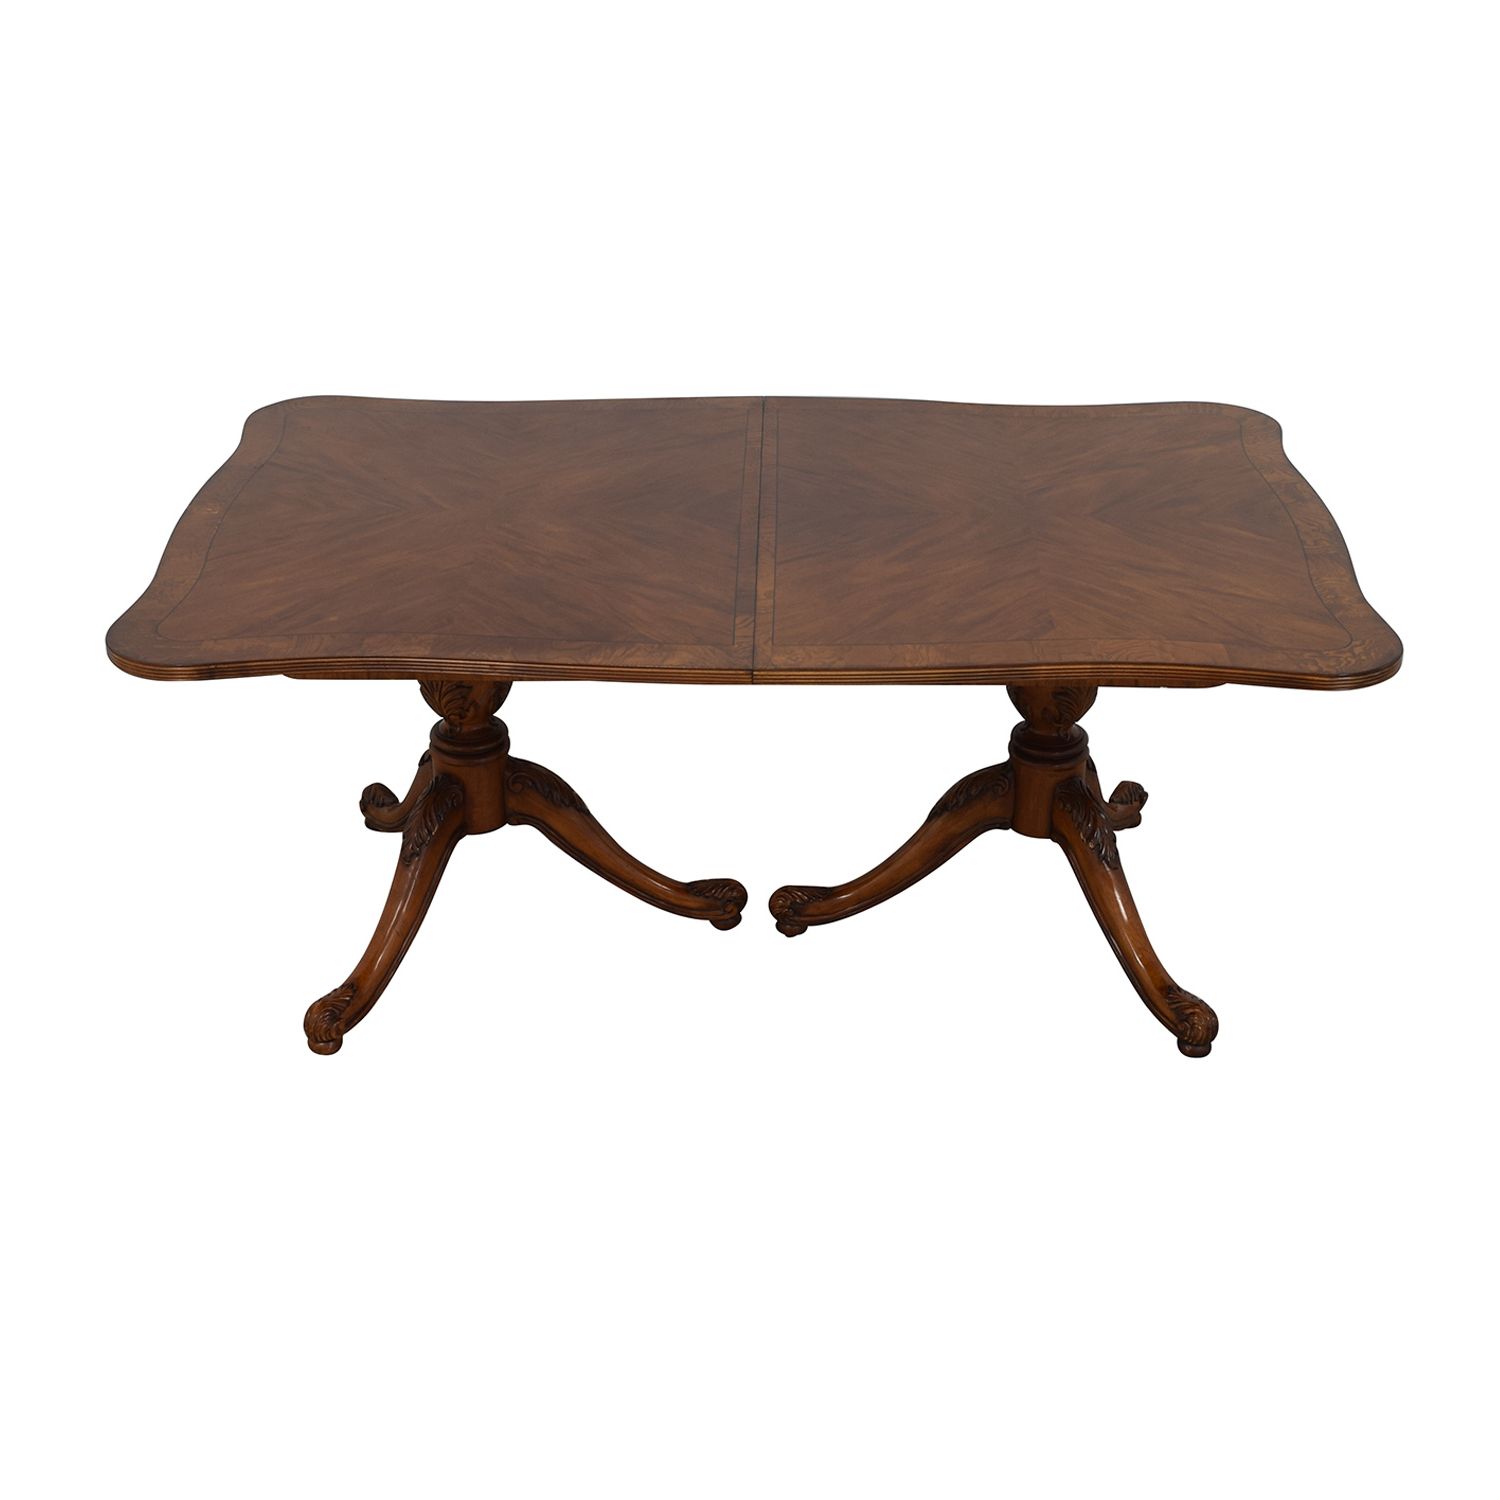 [%76% Off – Drexel Heritage Drexel Heritage Dining Table / Tables Pertaining To Most Popular Mahogany Shayne Drop Leaf Kitchen Tables|Mahogany Shayne Drop Leaf Kitchen Tables With Most Current 76% Off – Drexel Heritage Drexel Heritage Dining Table / Tables|Popular Mahogany Shayne Drop Leaf Kitchen Tables With 76% Off – Drexel Heritage Drexel Heritage Dining Table / Tables|Popular 76% Off – Drexel Heritage Drexel Heritage Dining Table / Tables Throughout Mahogany Shayne Drop Leaf Kitchen Tables%] (View 21 of 25)